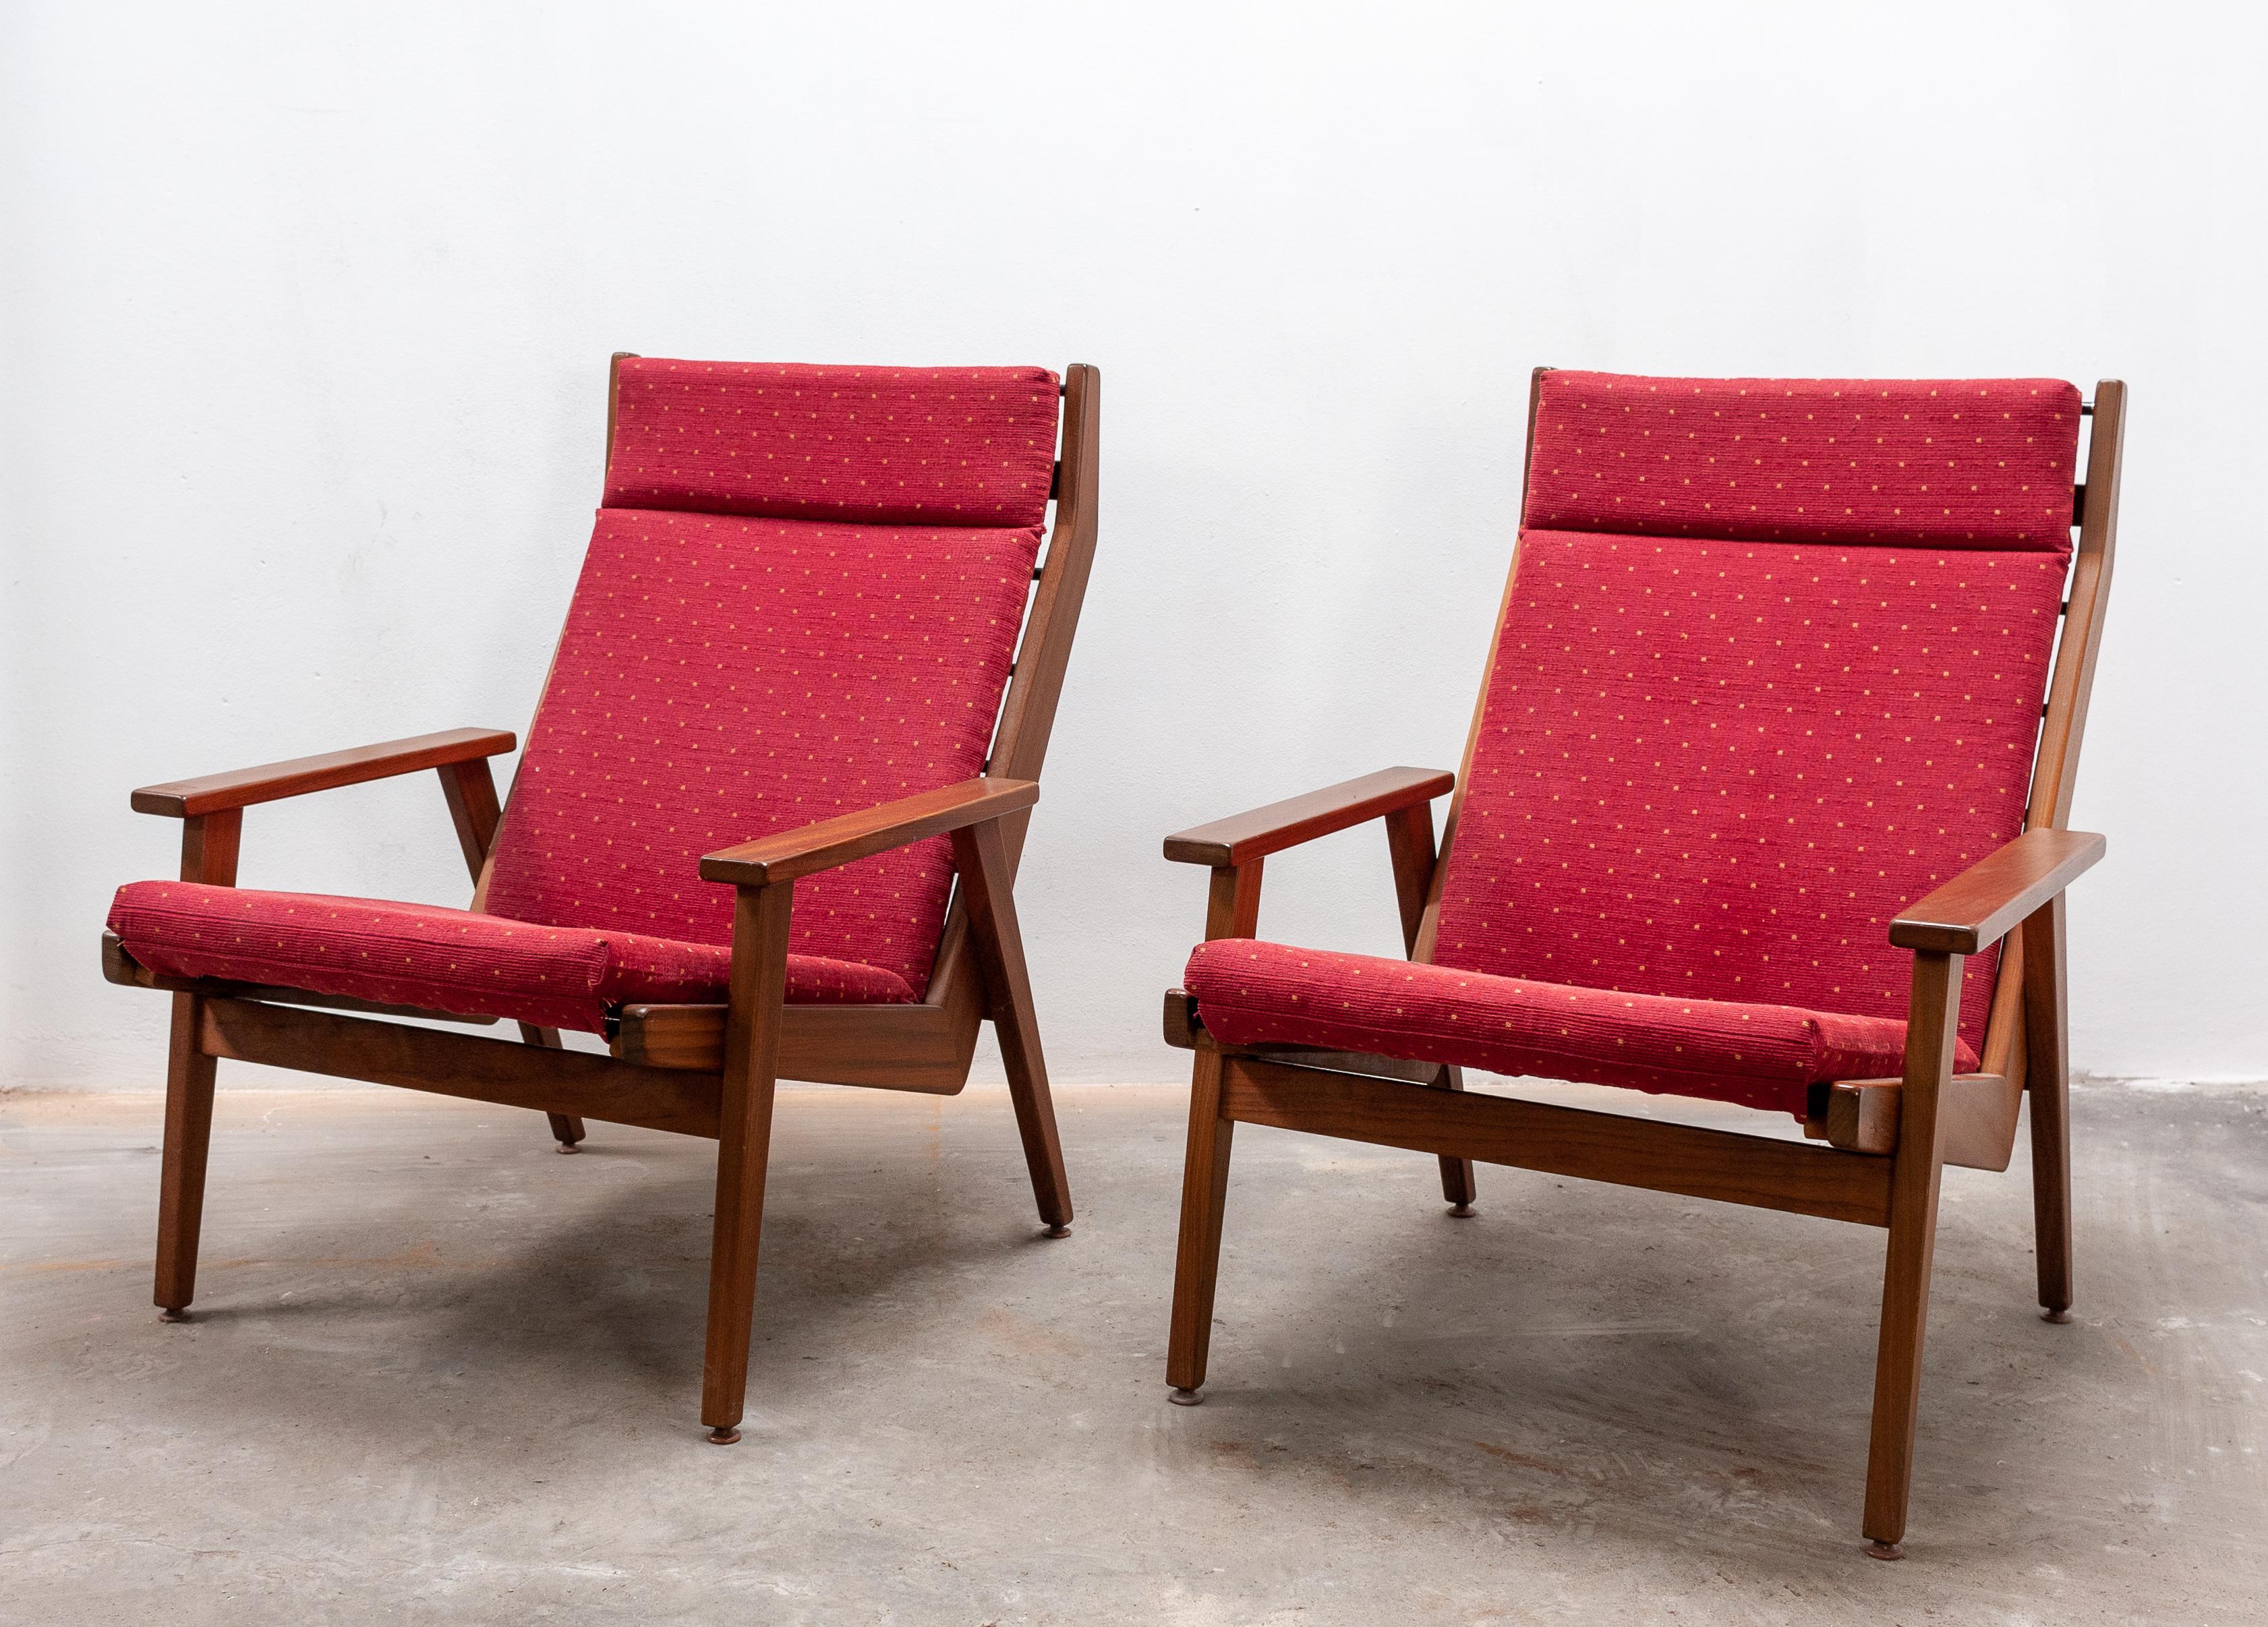 Two lovely Lotus lounge chairs designed by Rob Parry for De Ster Gelderland, the Netherlands in the 1950s
In a very good condition. Teak wood with cherry red fabric upholstery.